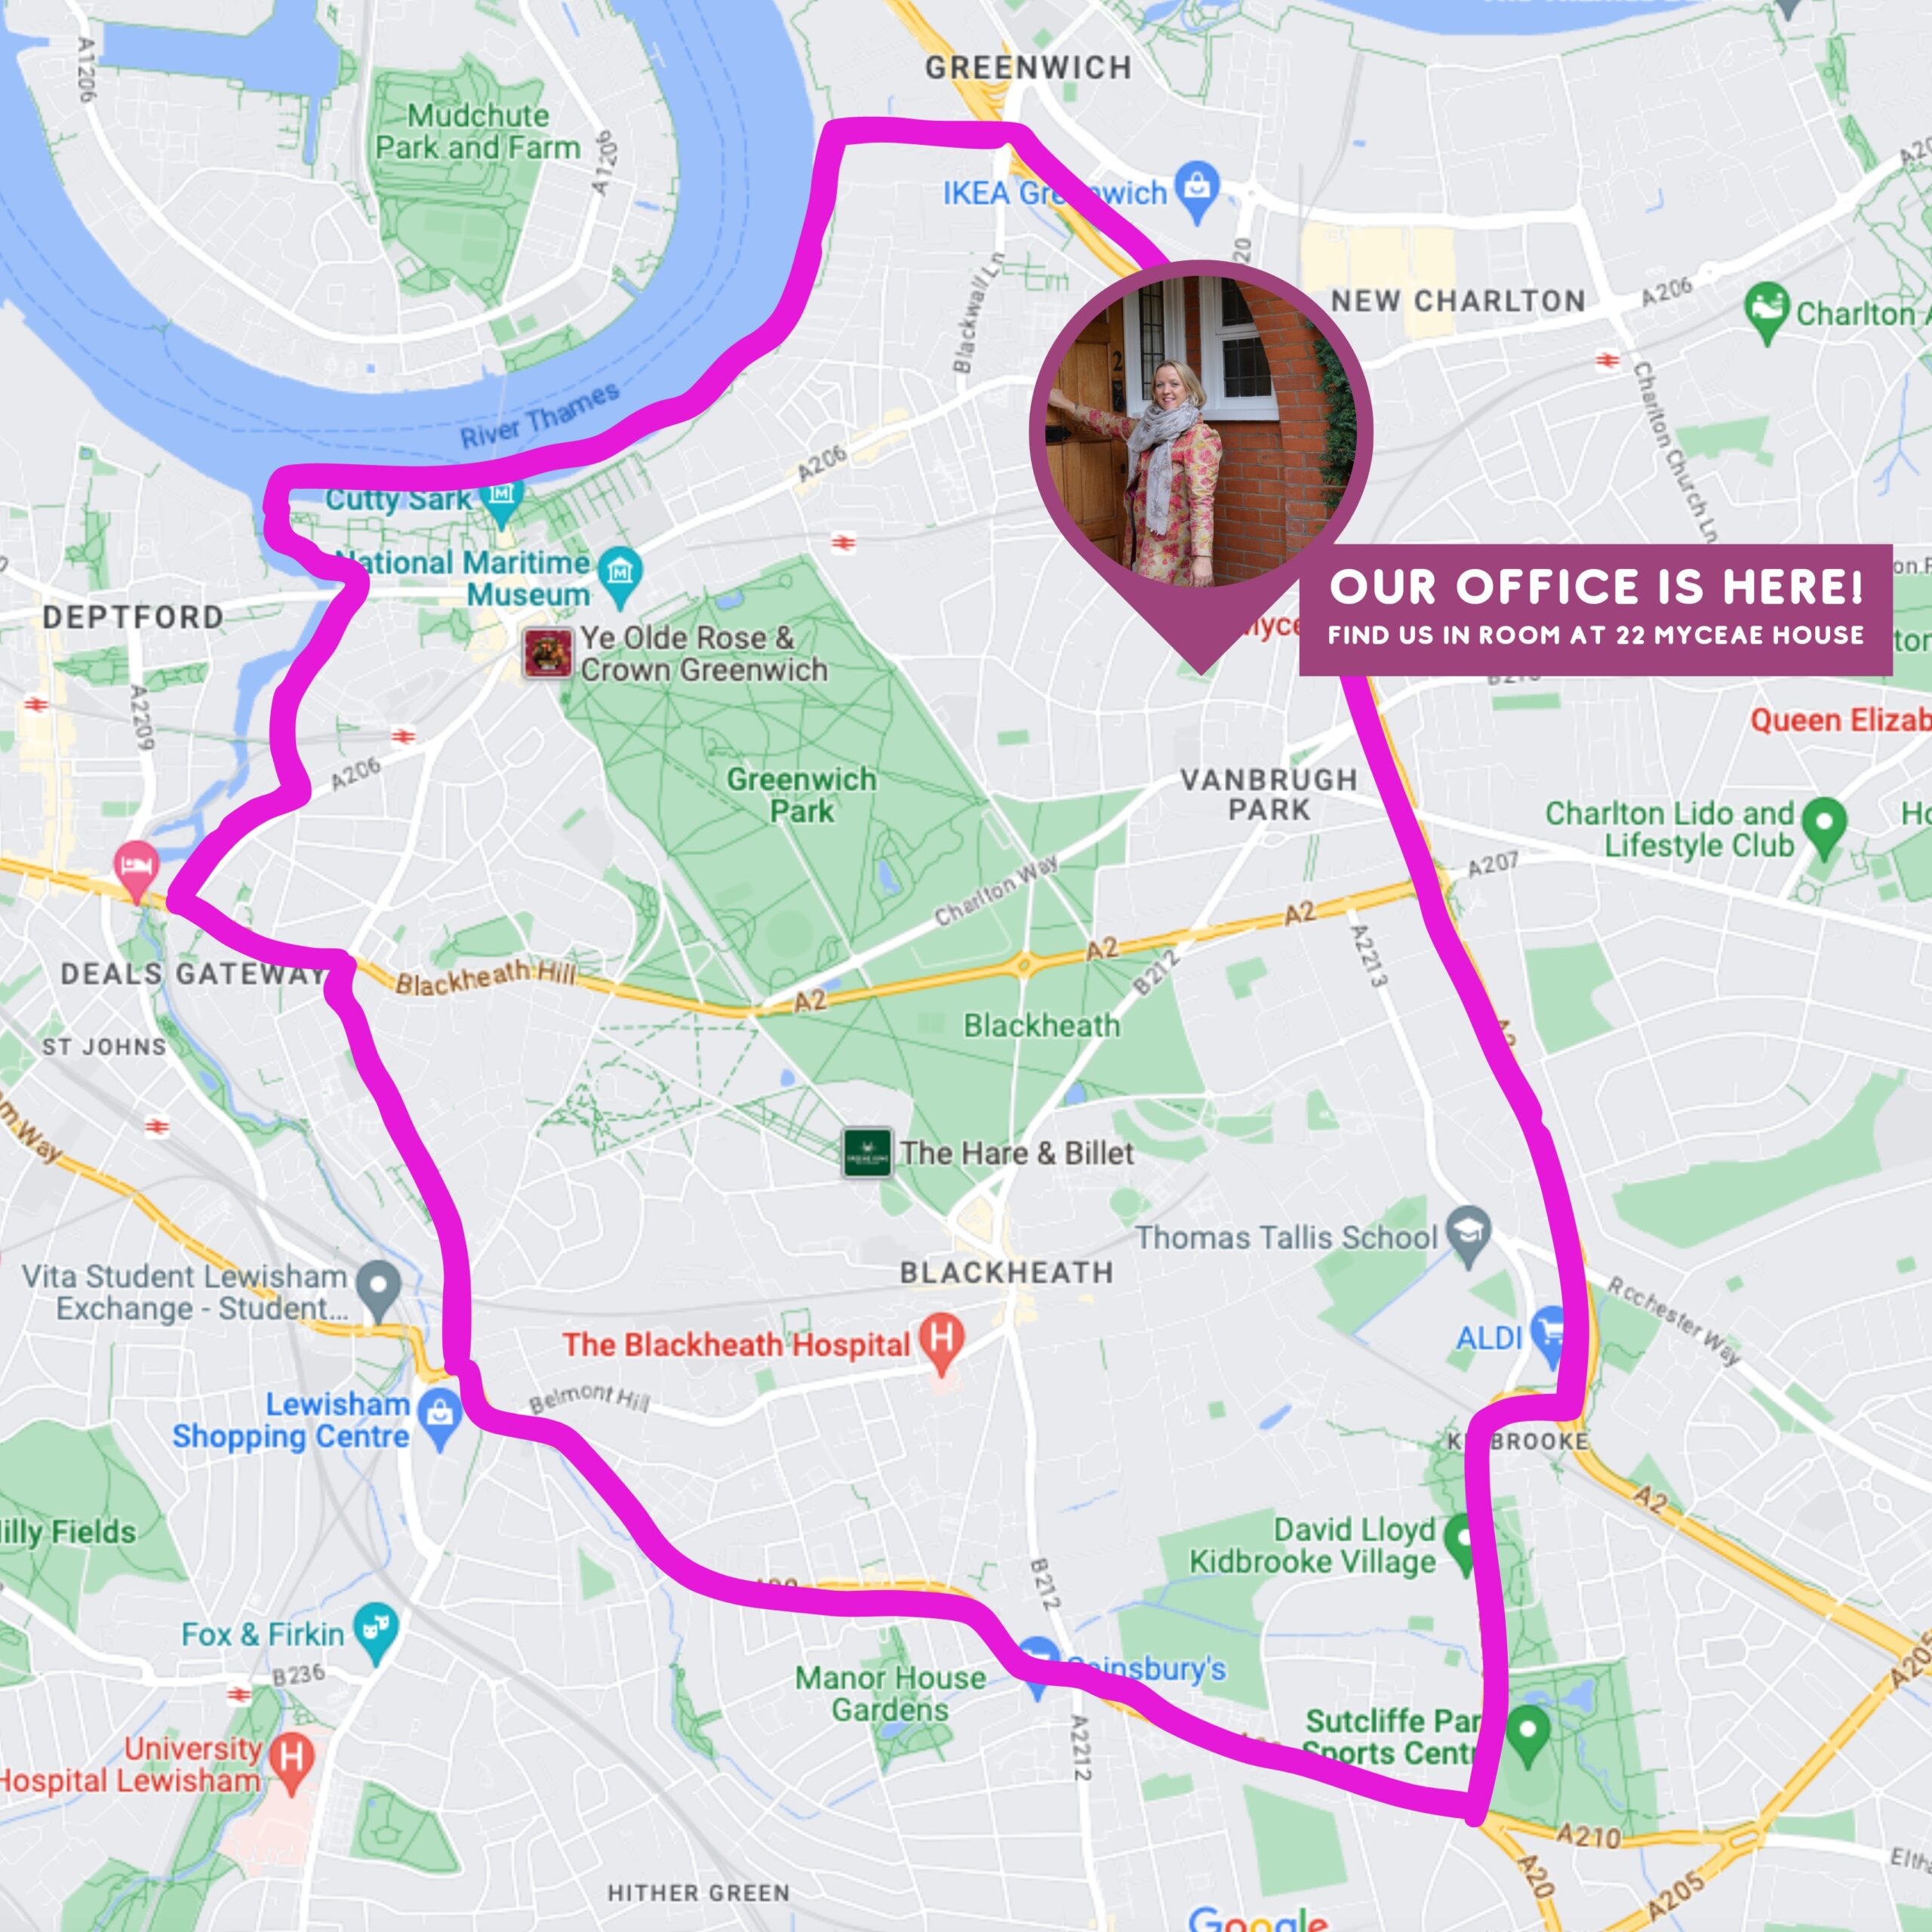 This is a graphic of the Becky Dell Music Academy catchmet area, covering both Greenwich and Blackheath. A pink line outlies the catchment area with a large purple pin marking the BDMA office at Mycenae House.